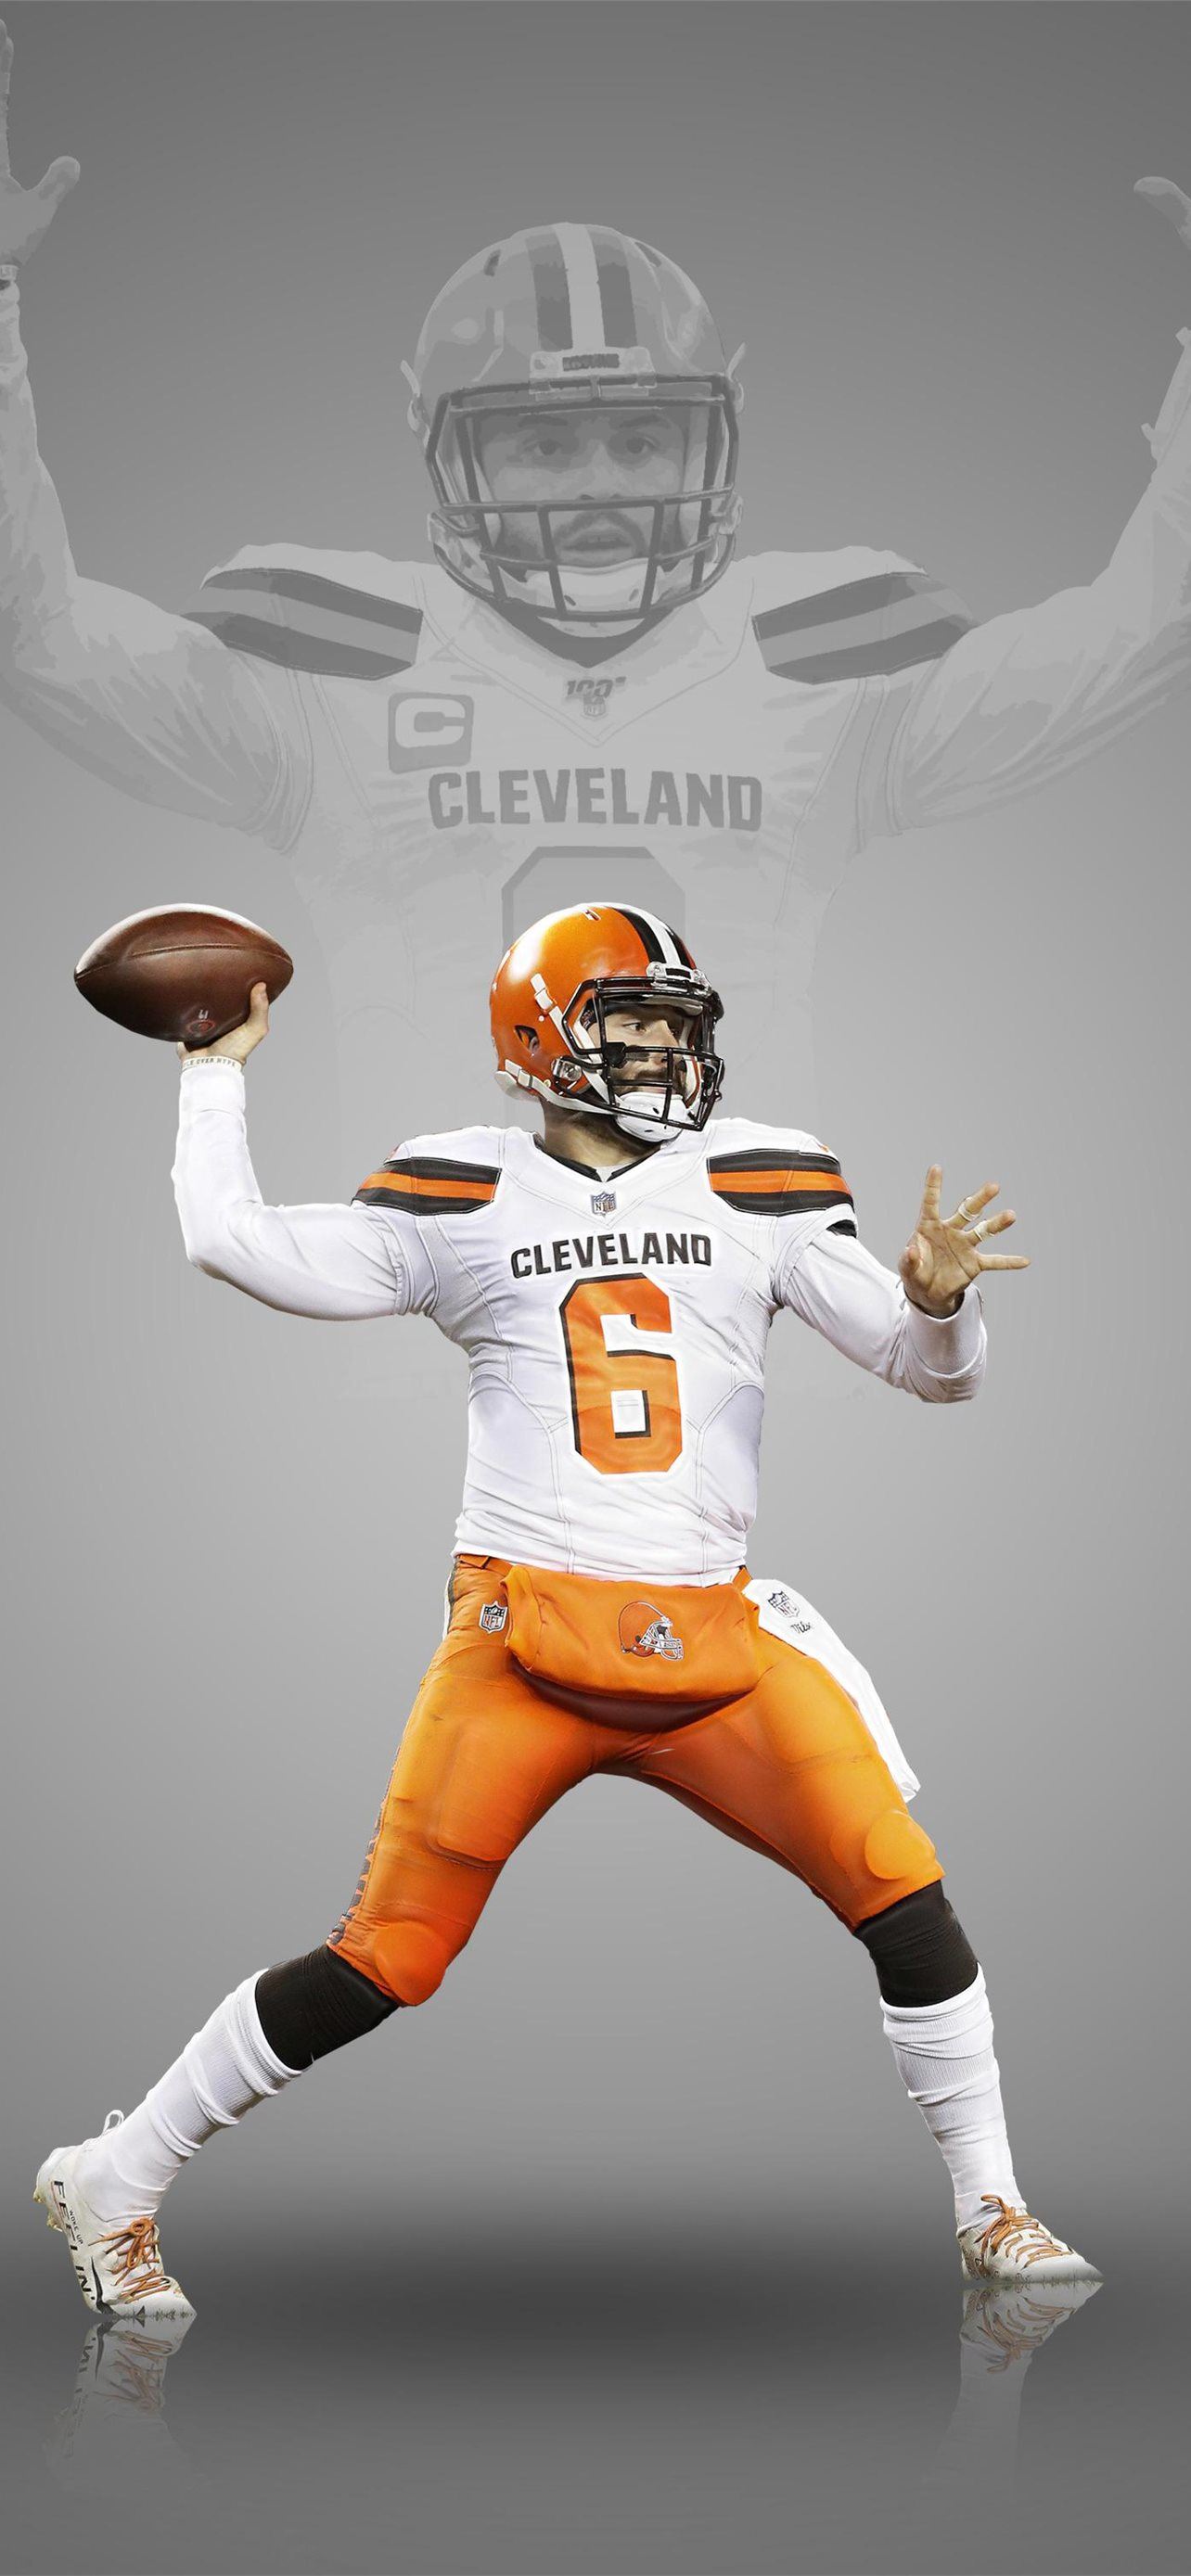 Cleveland Browns 1080P 2k 4k HD wallpapers backgrounds free download   Rare Gallery